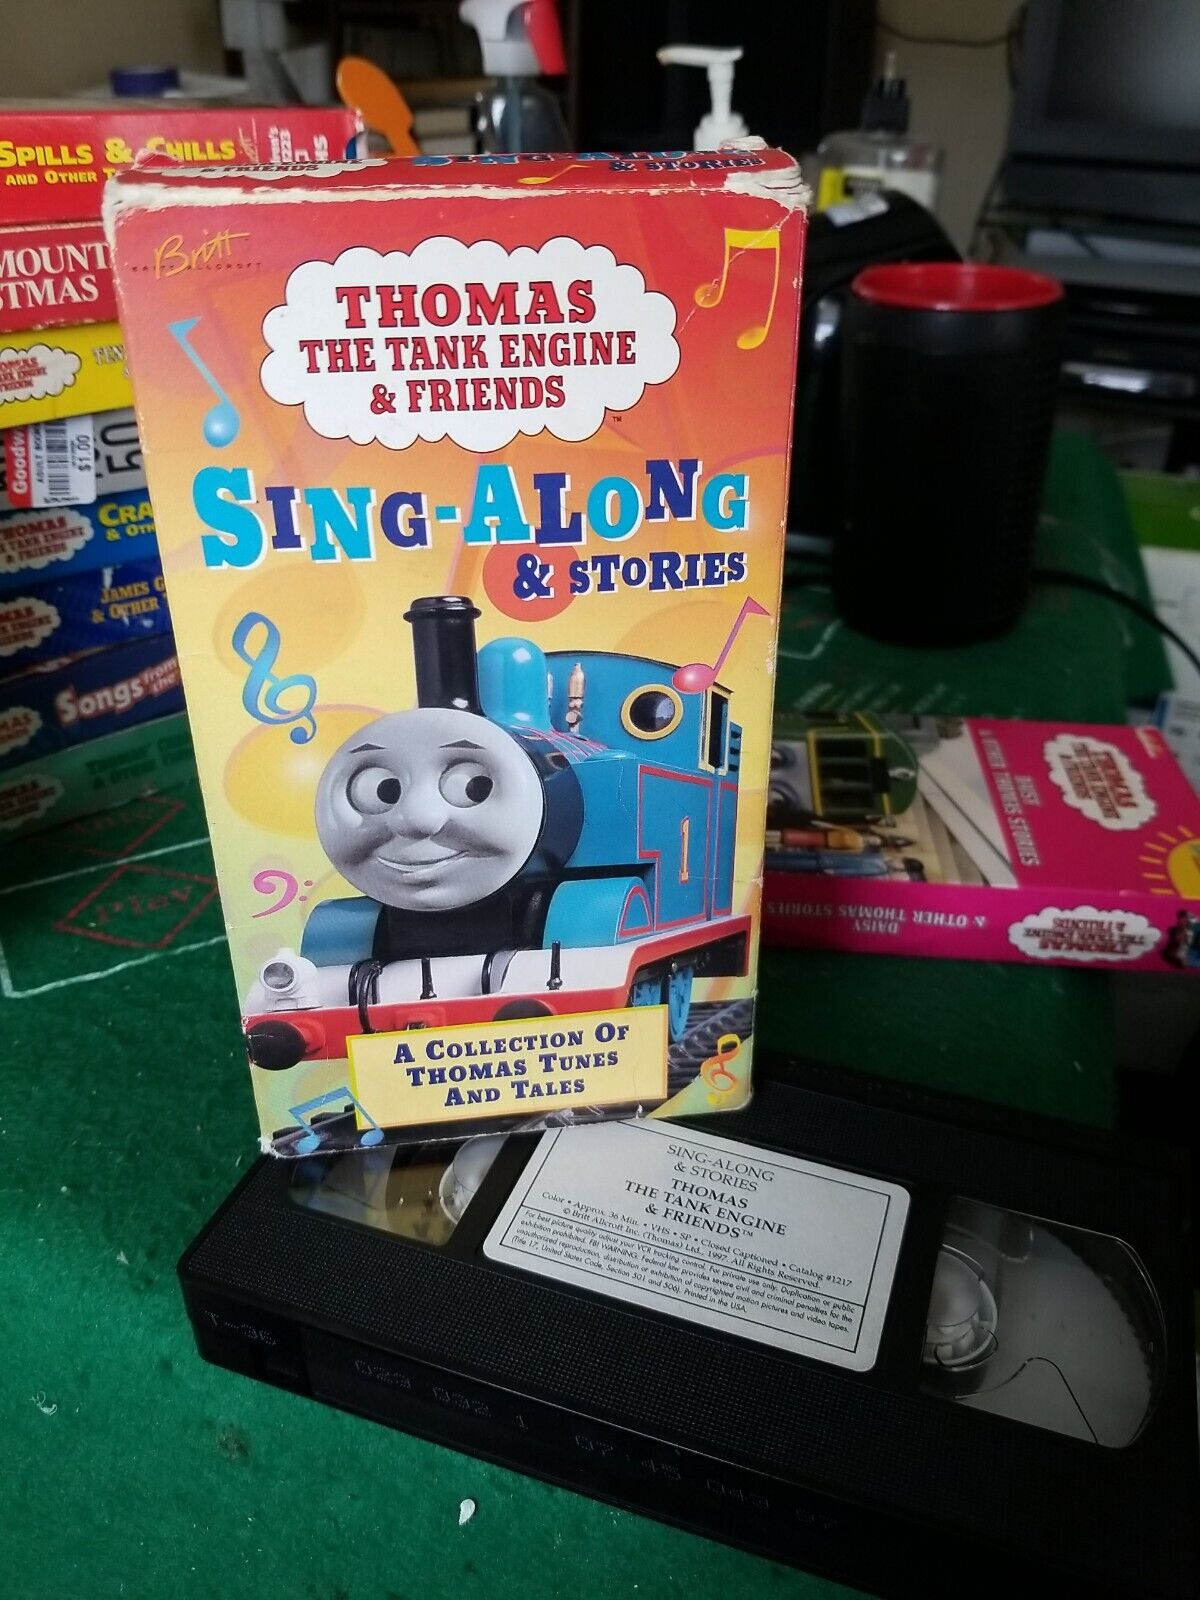 Thomas The Tank Engine & Friends Sing-Along & Stories VHS